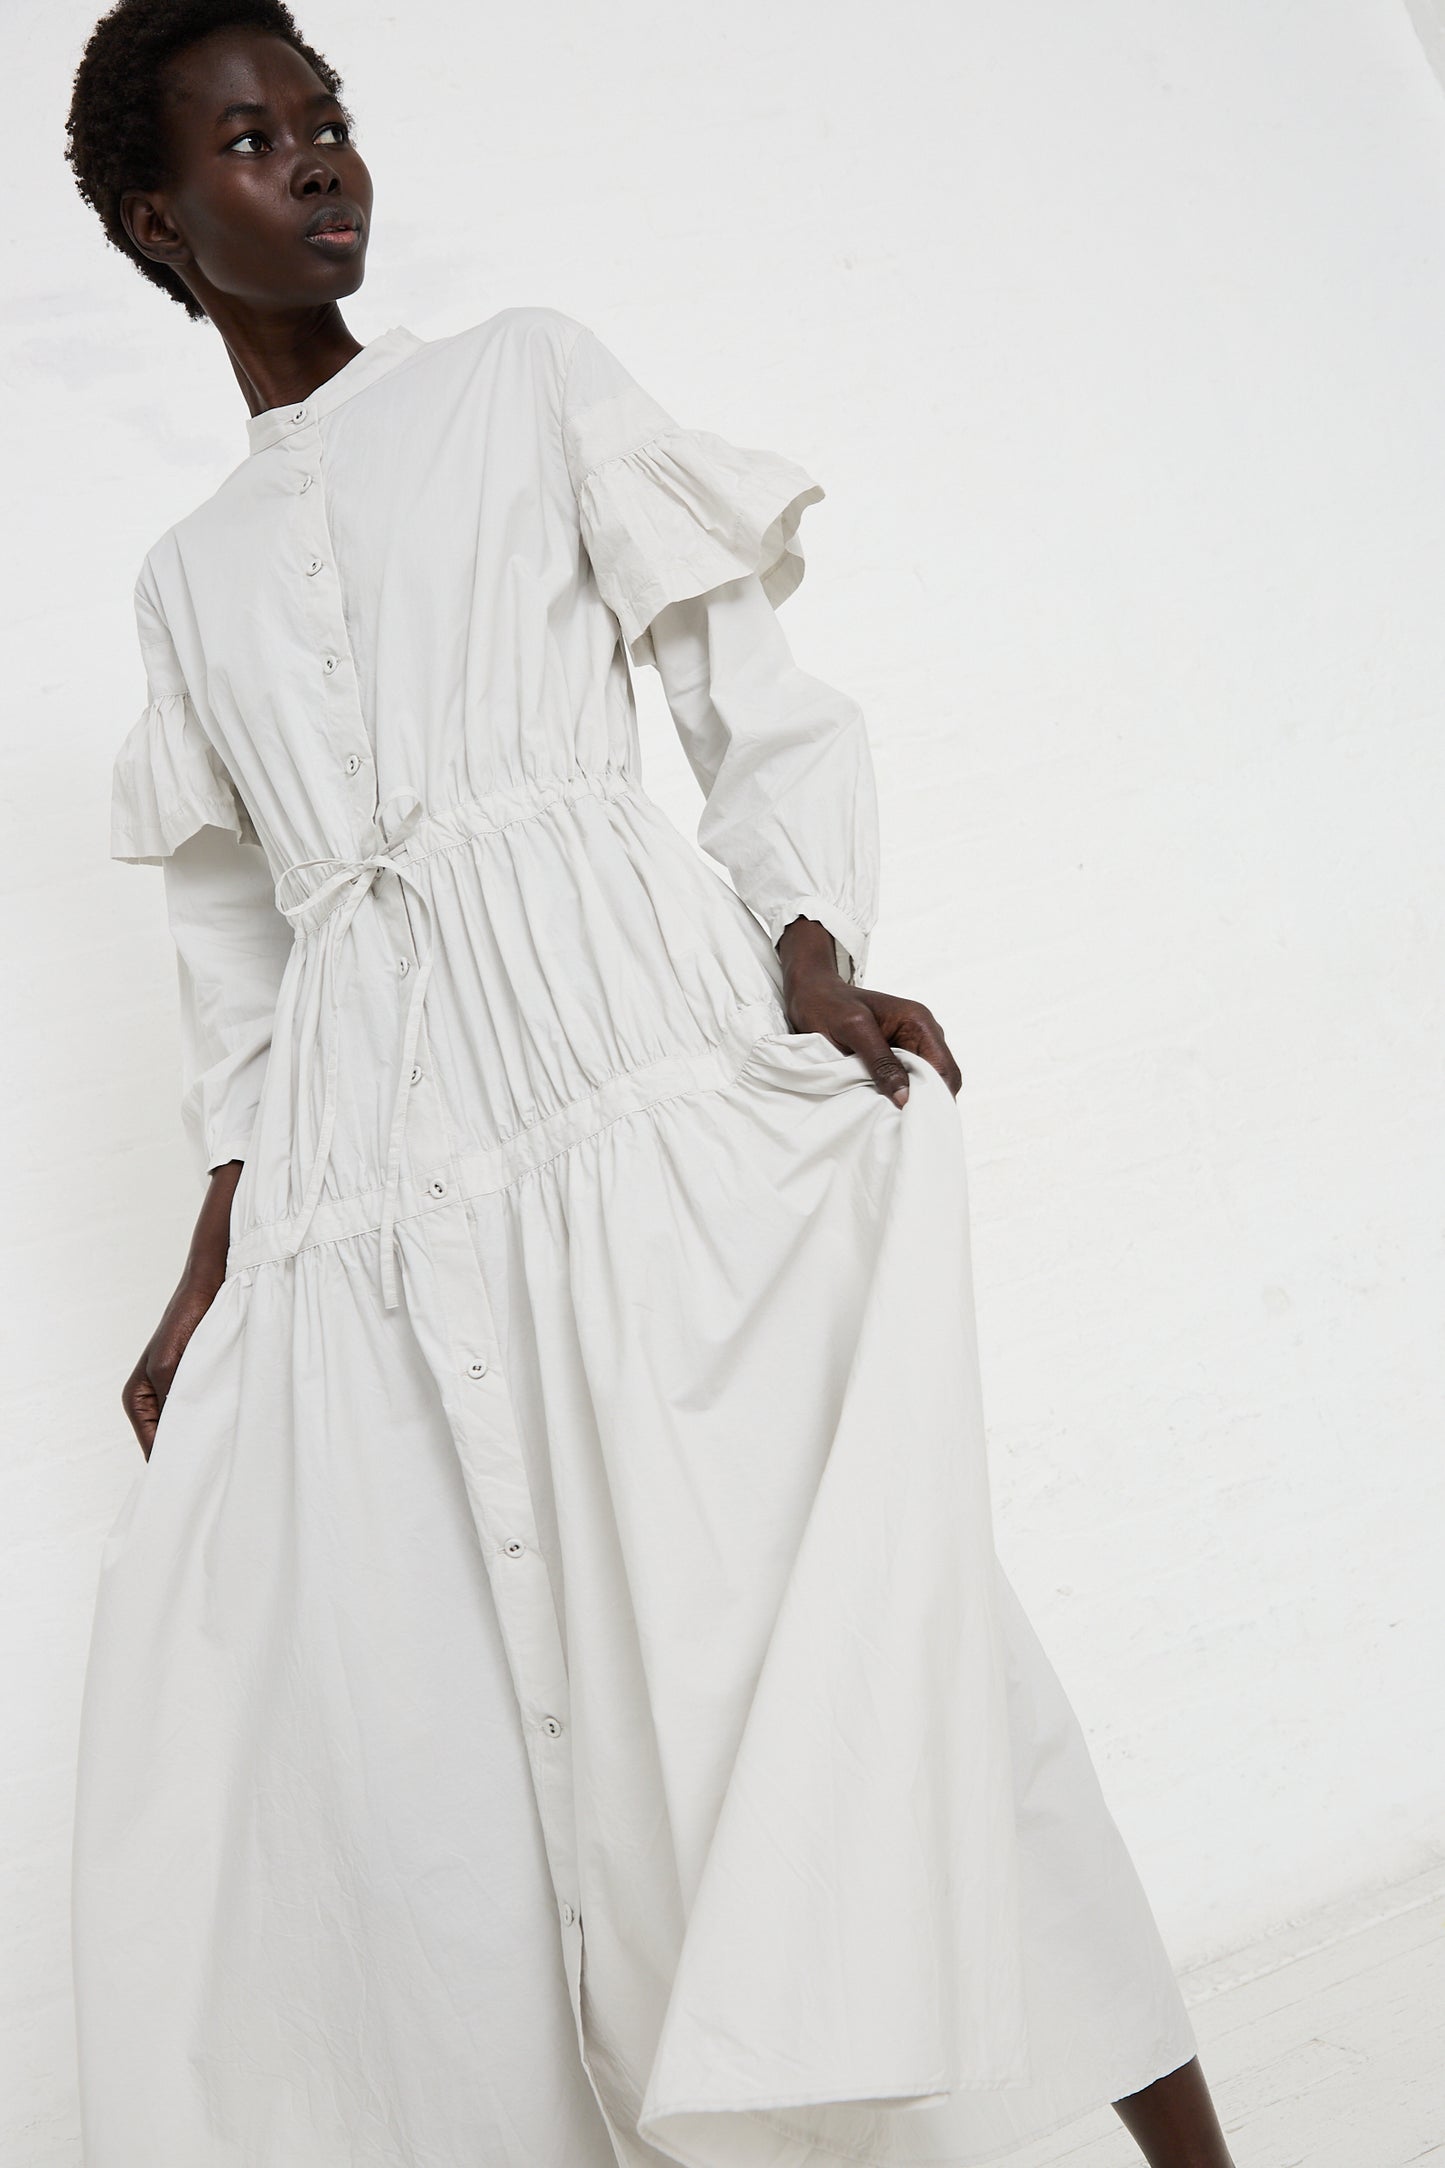 A person wearing a long, white Cotton Chemise à la Reine in Turnip with ruffled sleeves by Hallelujah, handmade in Kyoto using vegetable dyes, poses against a plain white background.